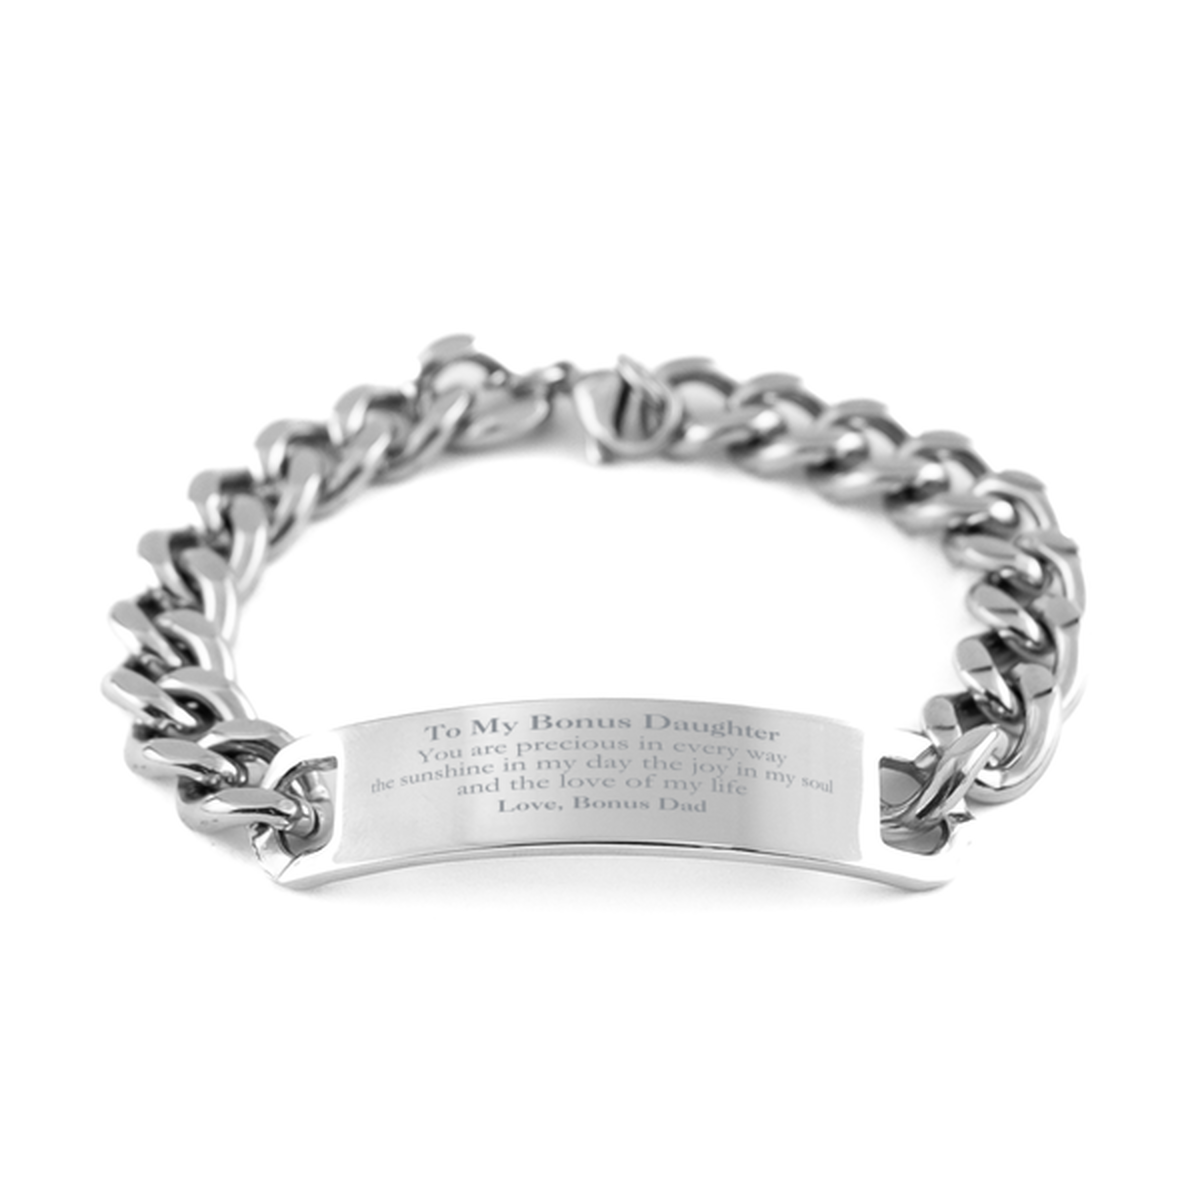 Graduation Gifts for Bonus Daughter Cuban Chain Stainless Steel Bracelet Present from Bonus Dad, Christmas Bonus Daughter Birthday Gifts Bonus Daughter You are precious in every way the sunshine in my day. Love, Bonus Dad